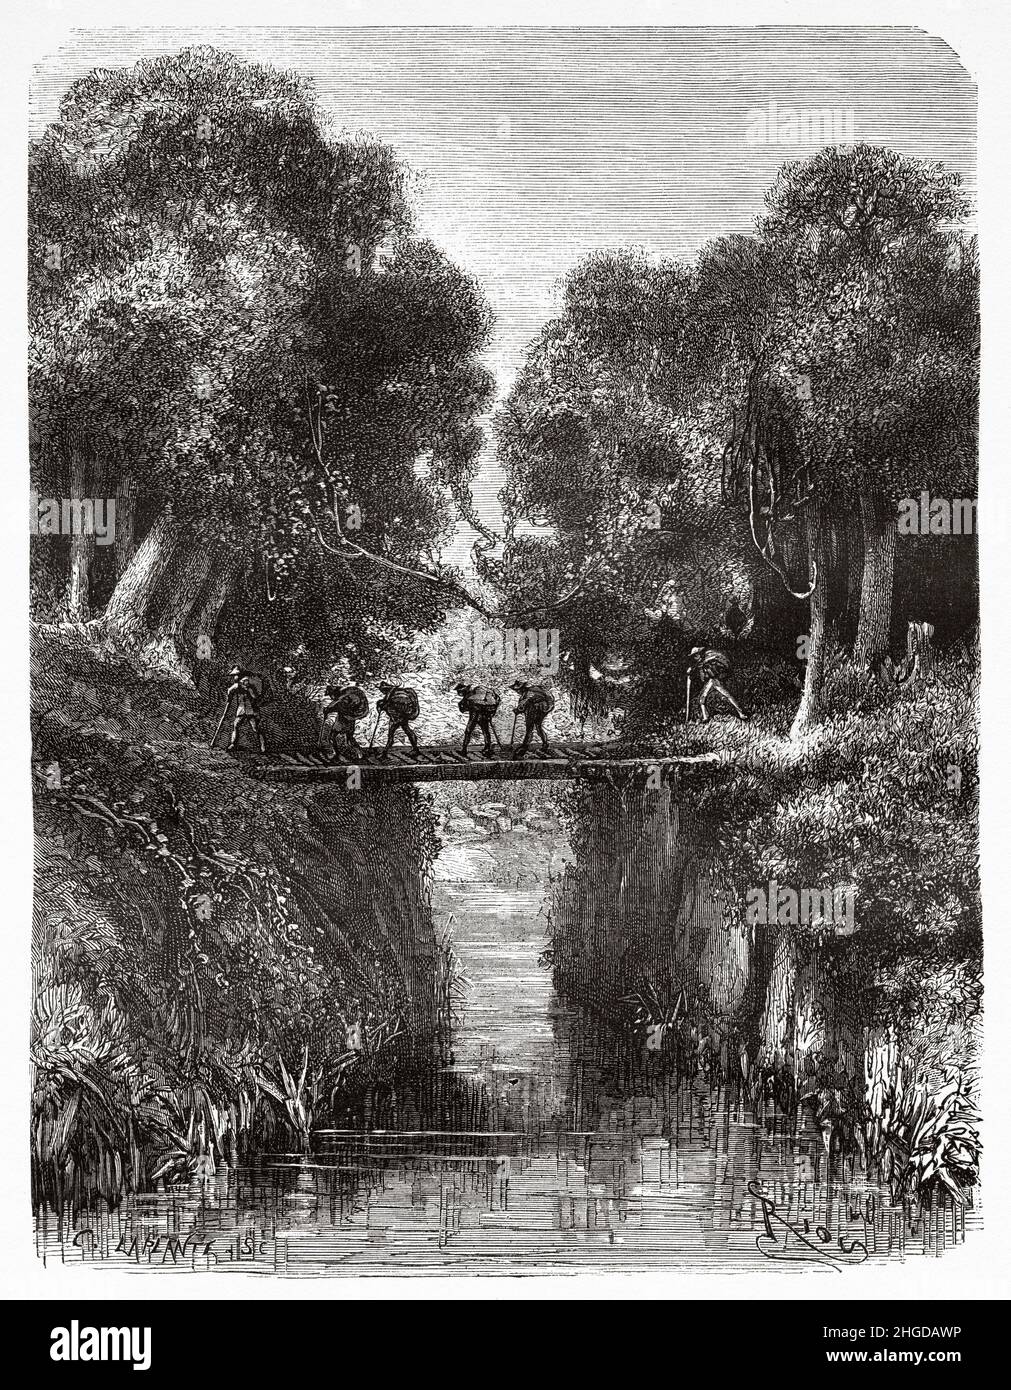 Mamabamba Bridge. Cutervo district, Cutervo Province, Cajamarca region, southern Peru. South America. Old 19th century engraved illustration from Journey across South America by Paul Marcoy, Le Tour du Monde 1870 Stock Photo